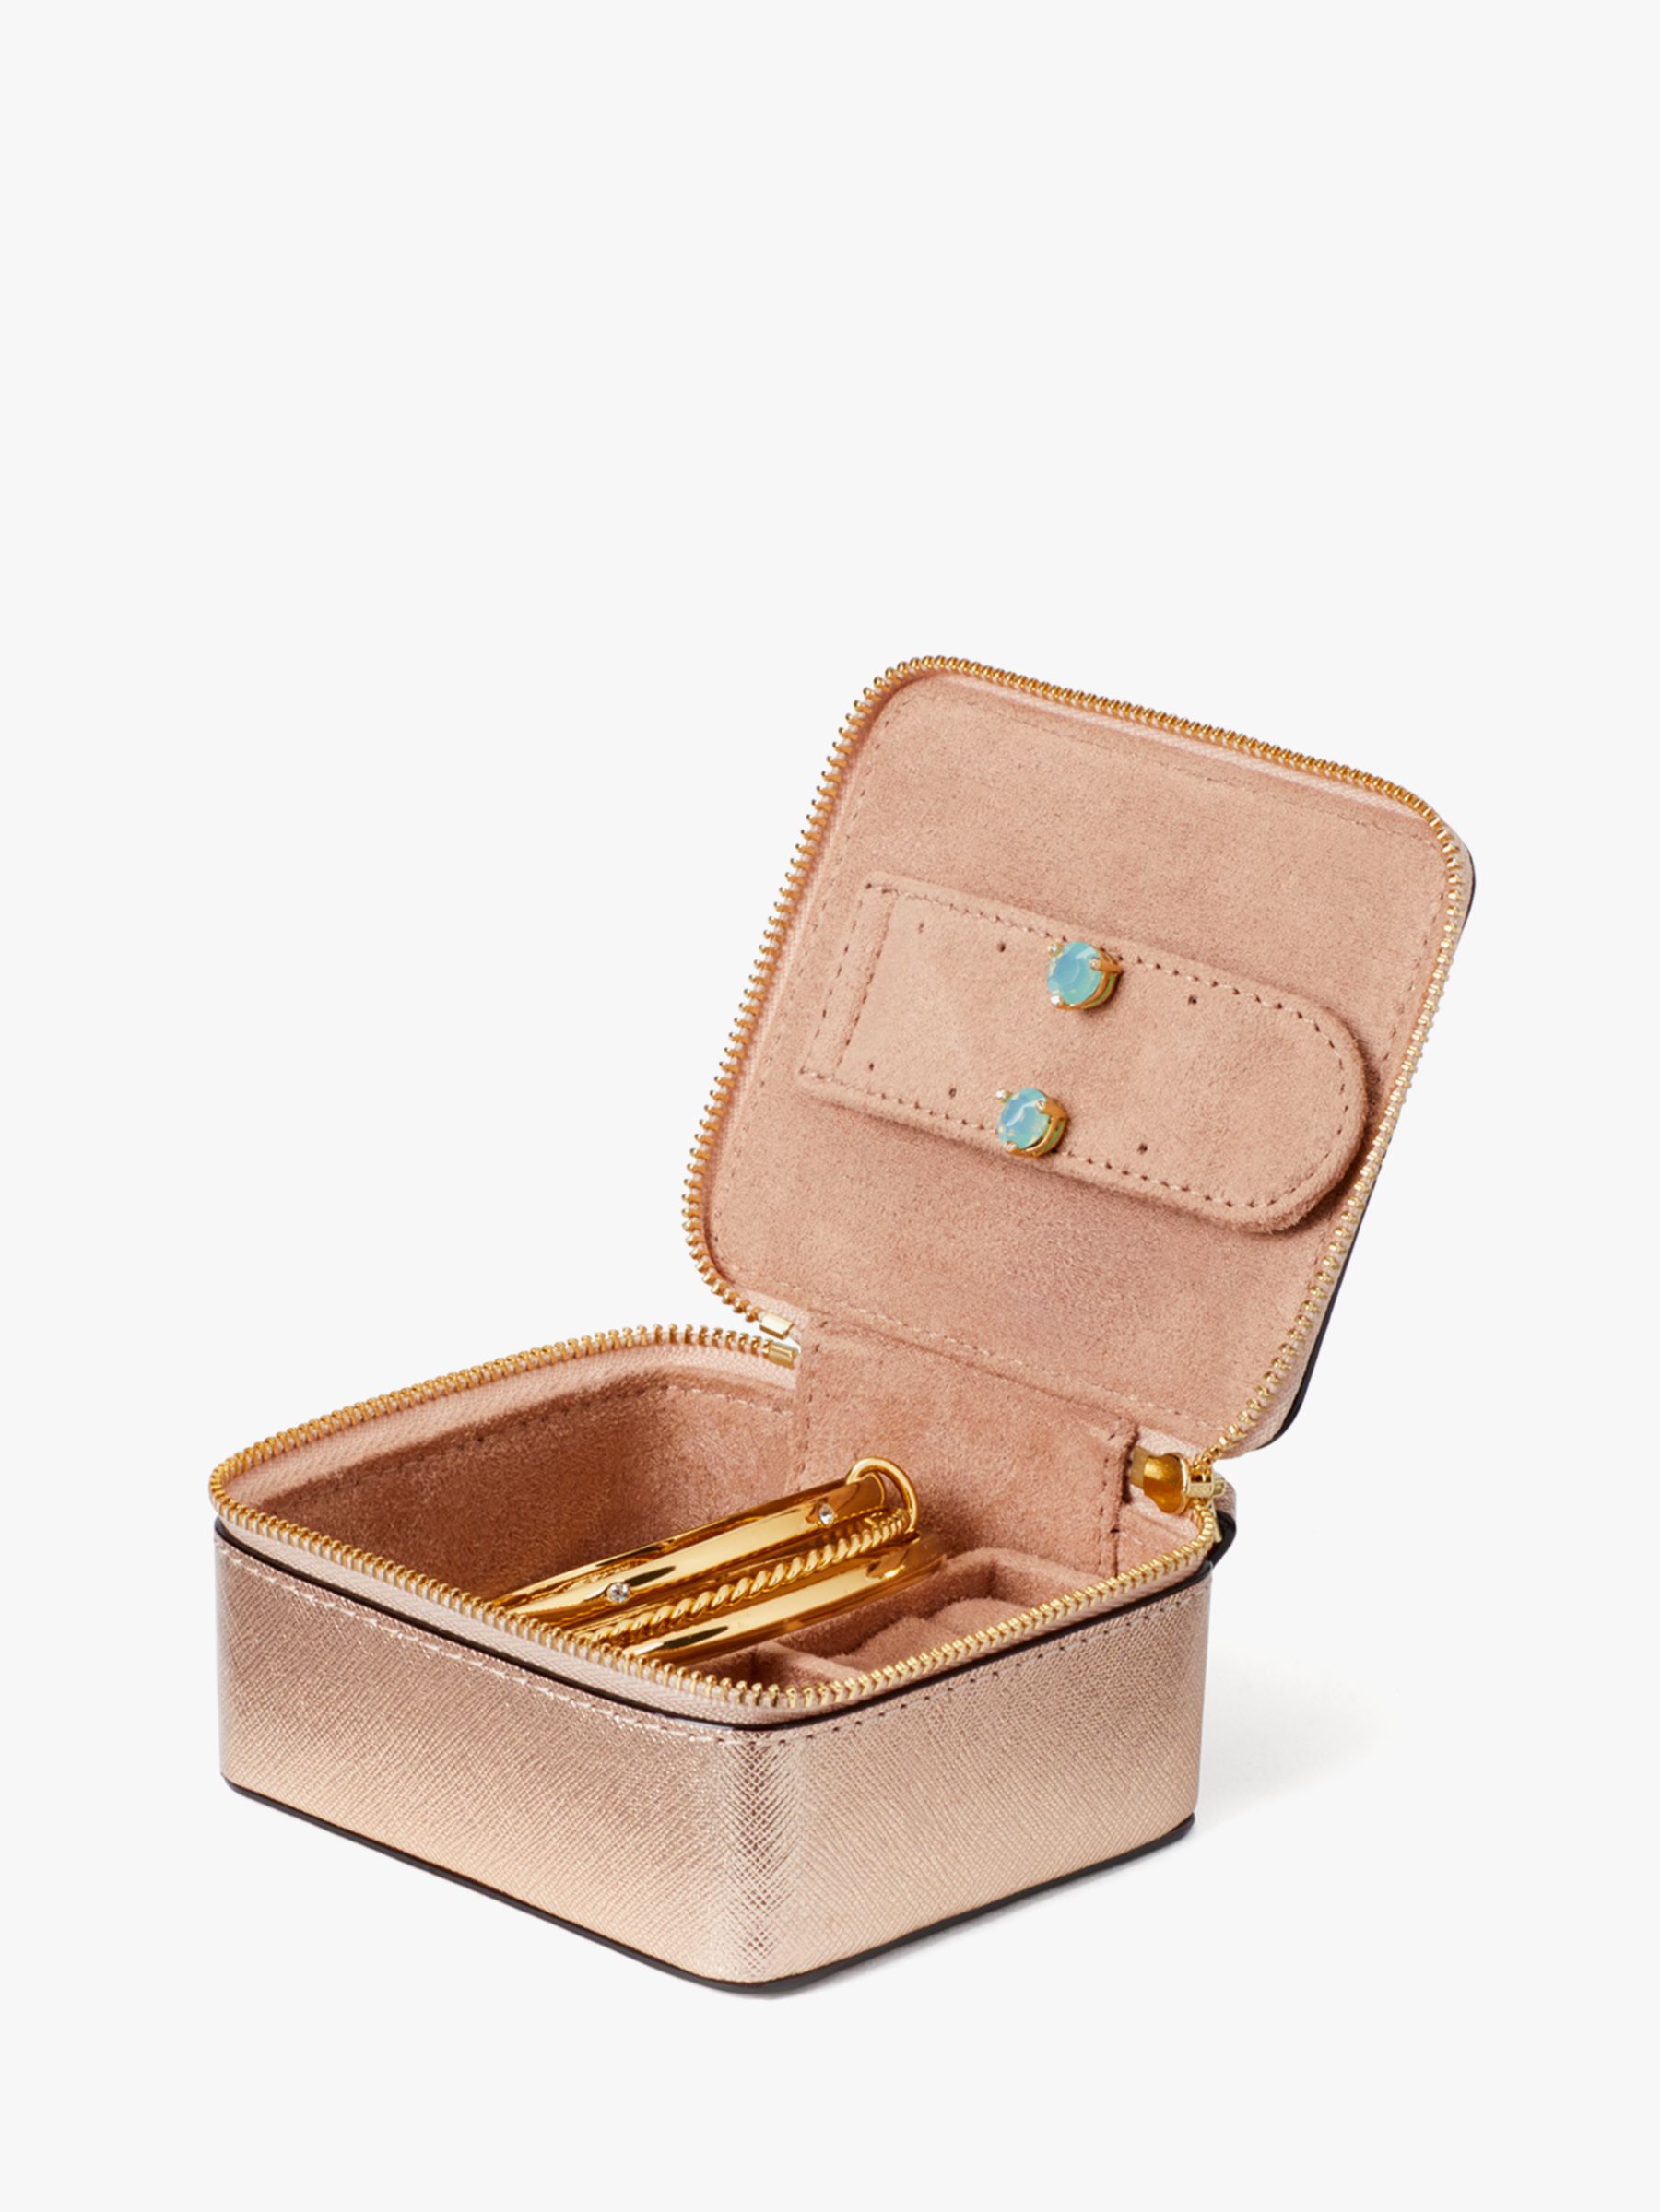 kate spade new york Ollie Small Leather Zipped Jewellery Box, Rose Gold